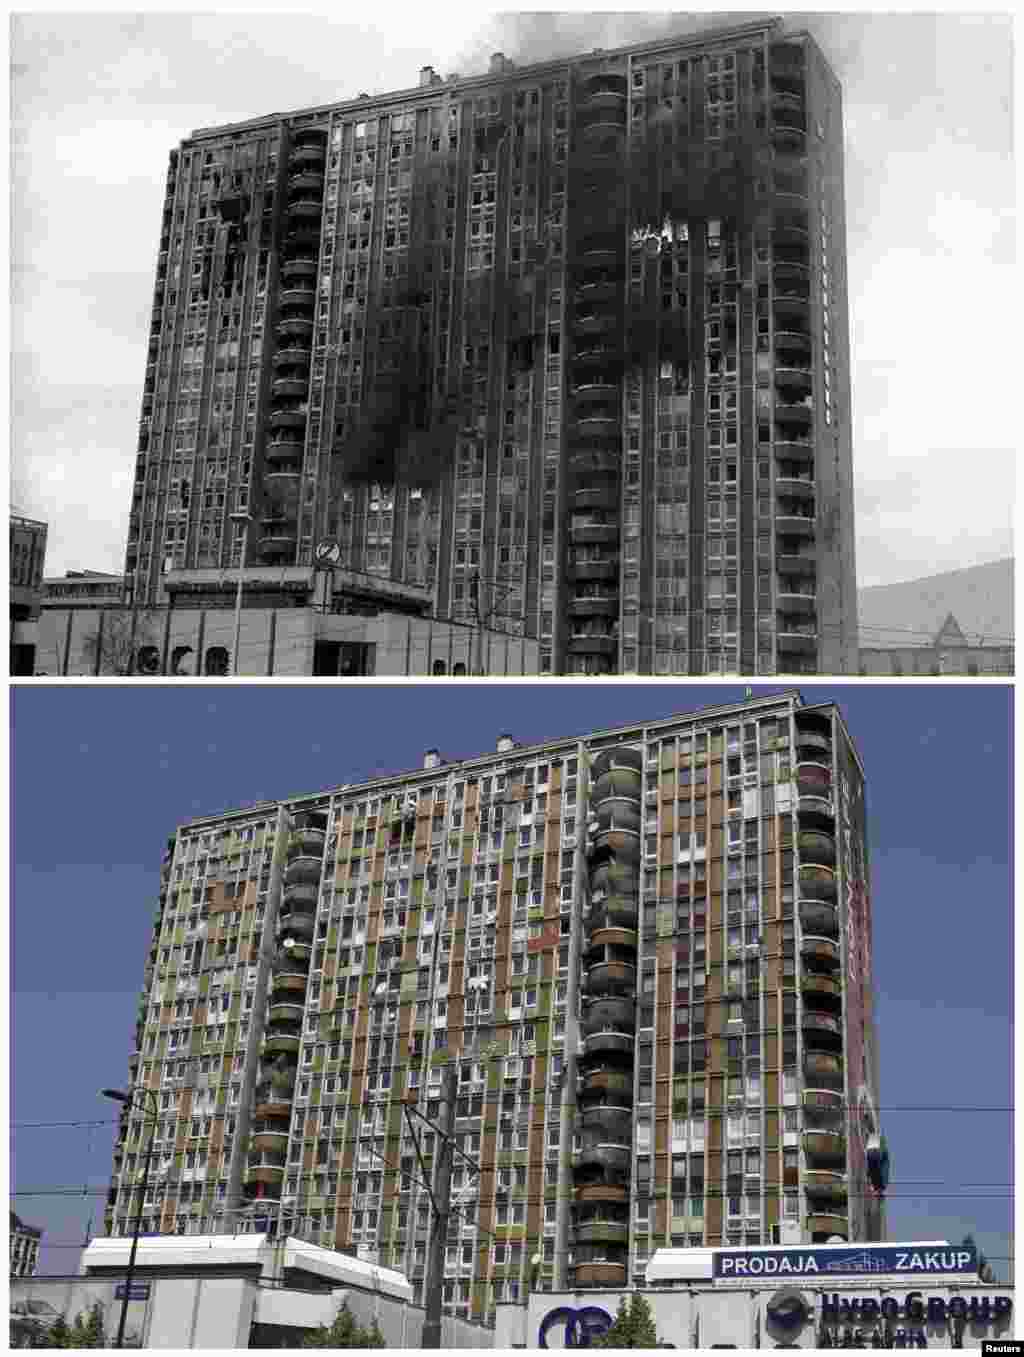 A building burning after being shelled in the Pofalici district in Sarajevo in April 1992. The same building pictured on May 30, 2011.